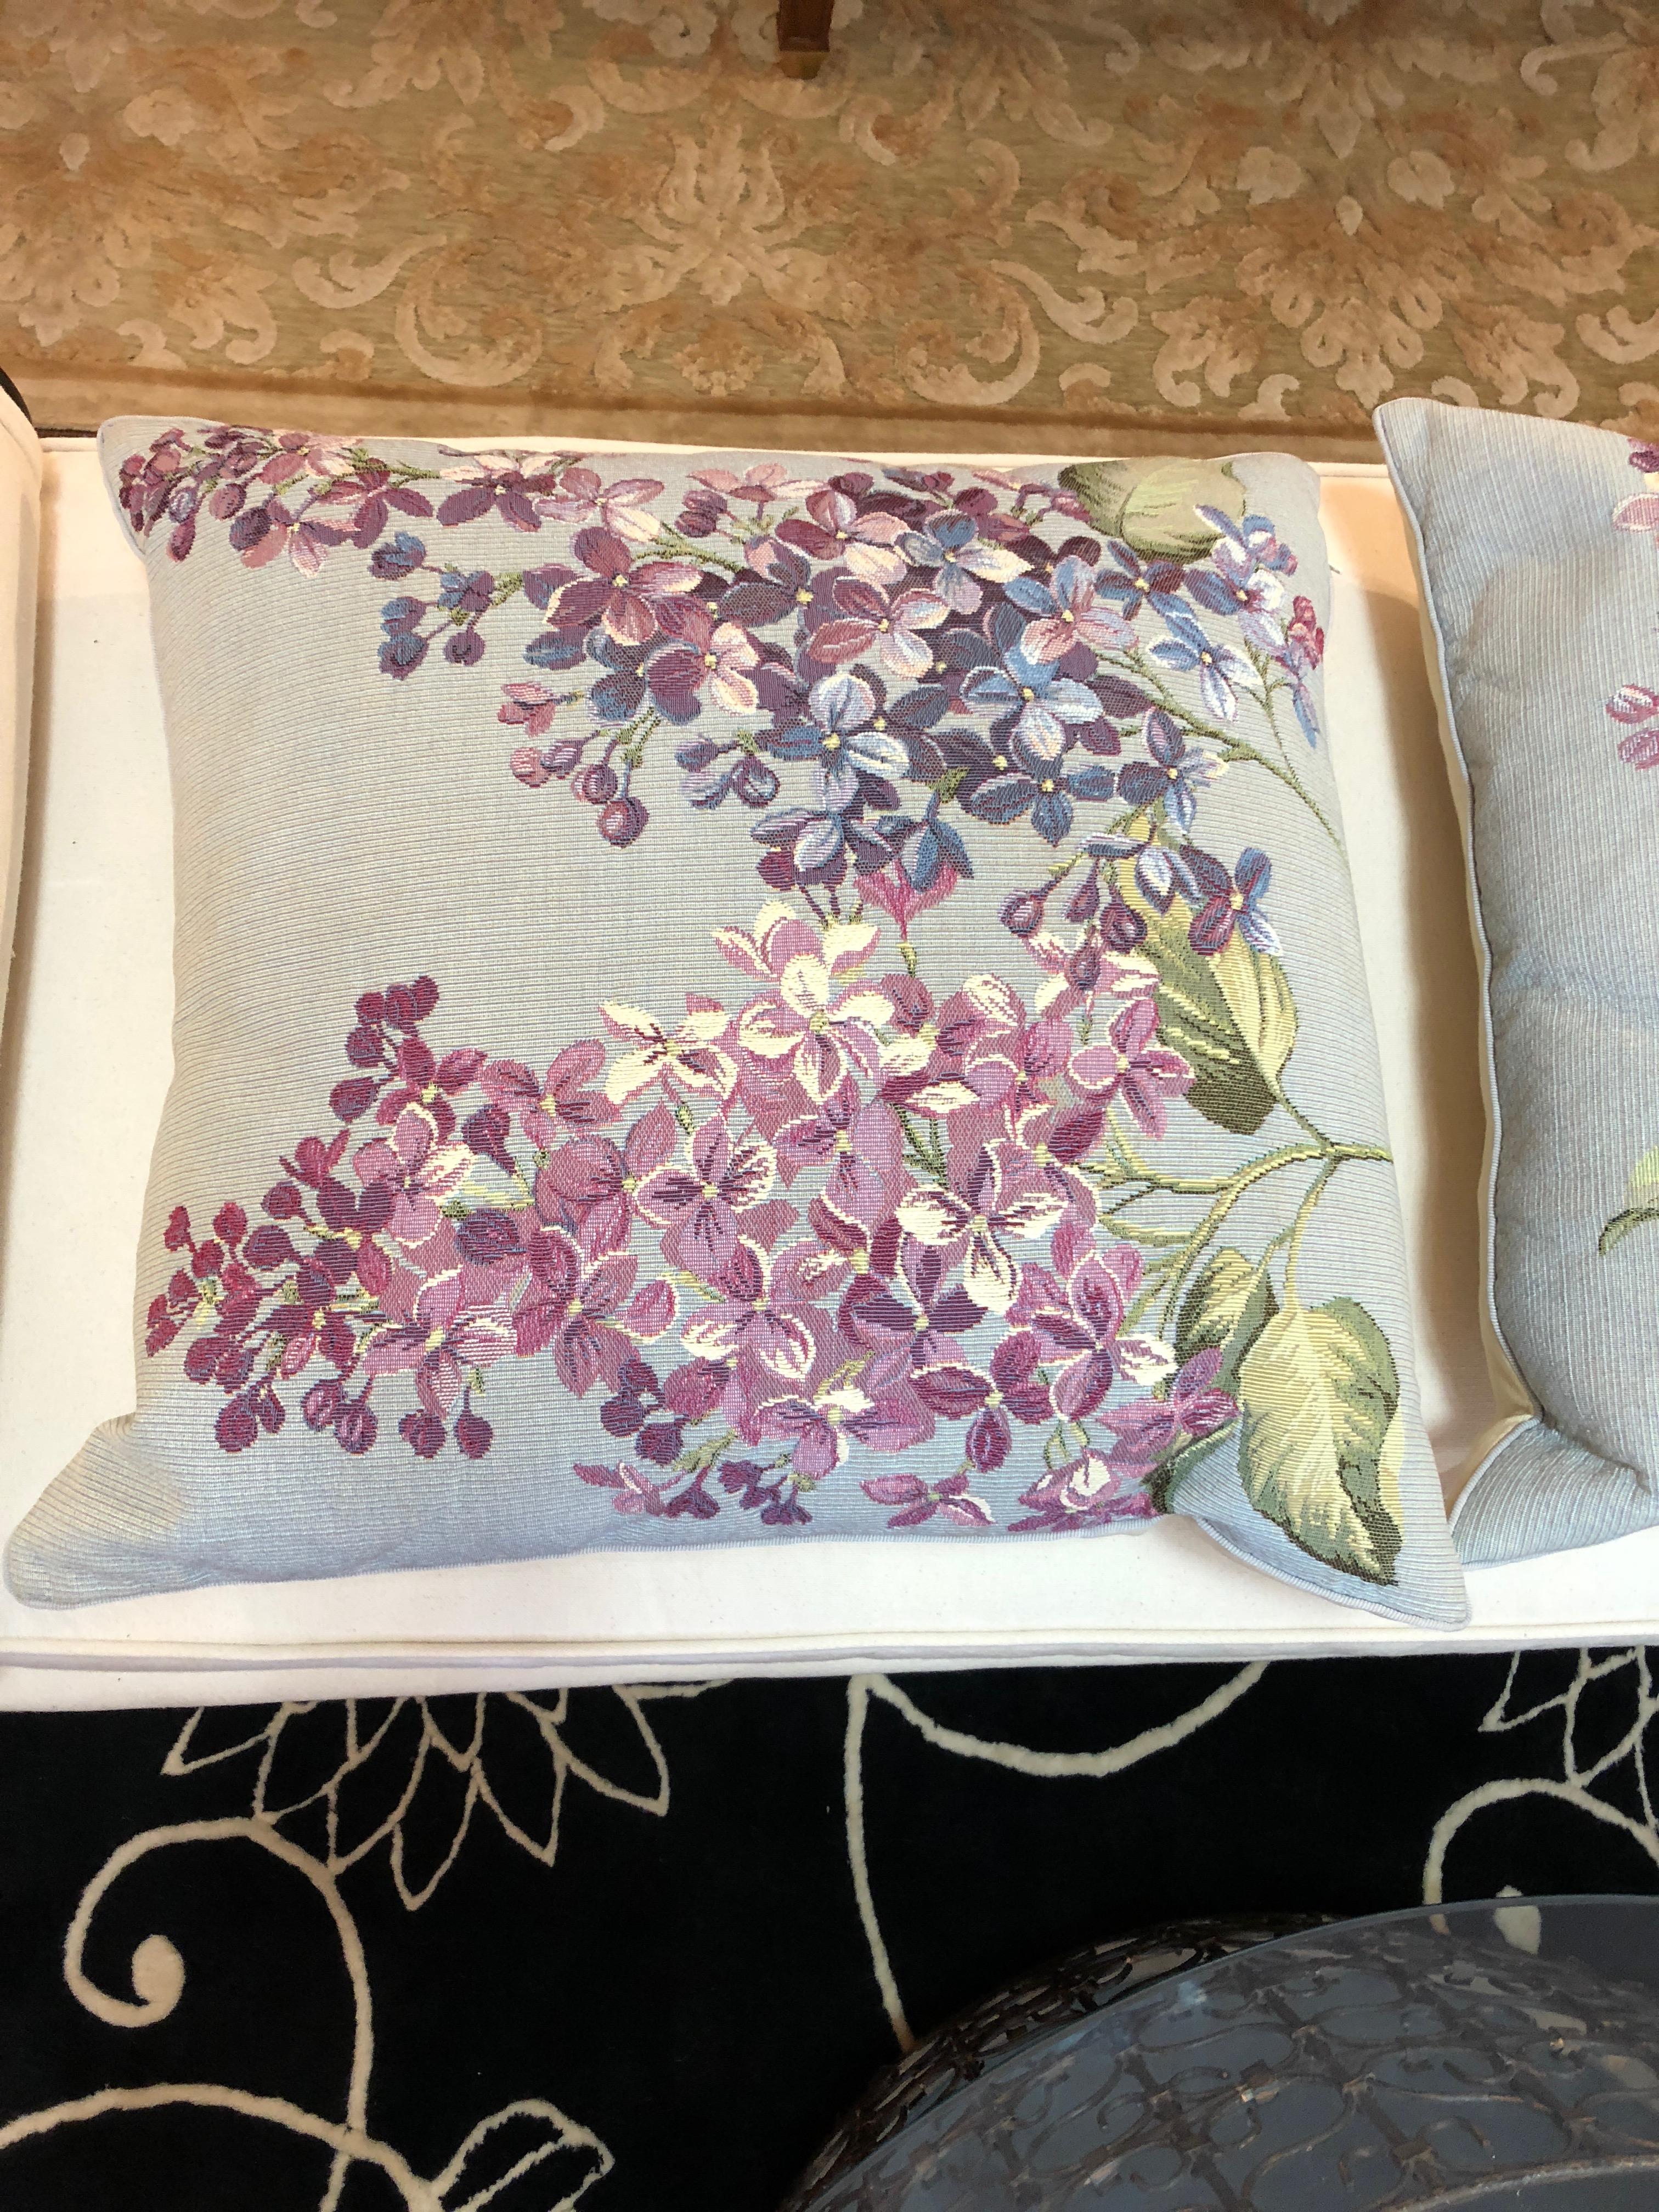 A pair of lovely tapestry pillows in gorgeous blues, purples and mauve having lilacs and a butterfly. Insert is down filled. Label is Iosis, Paris.